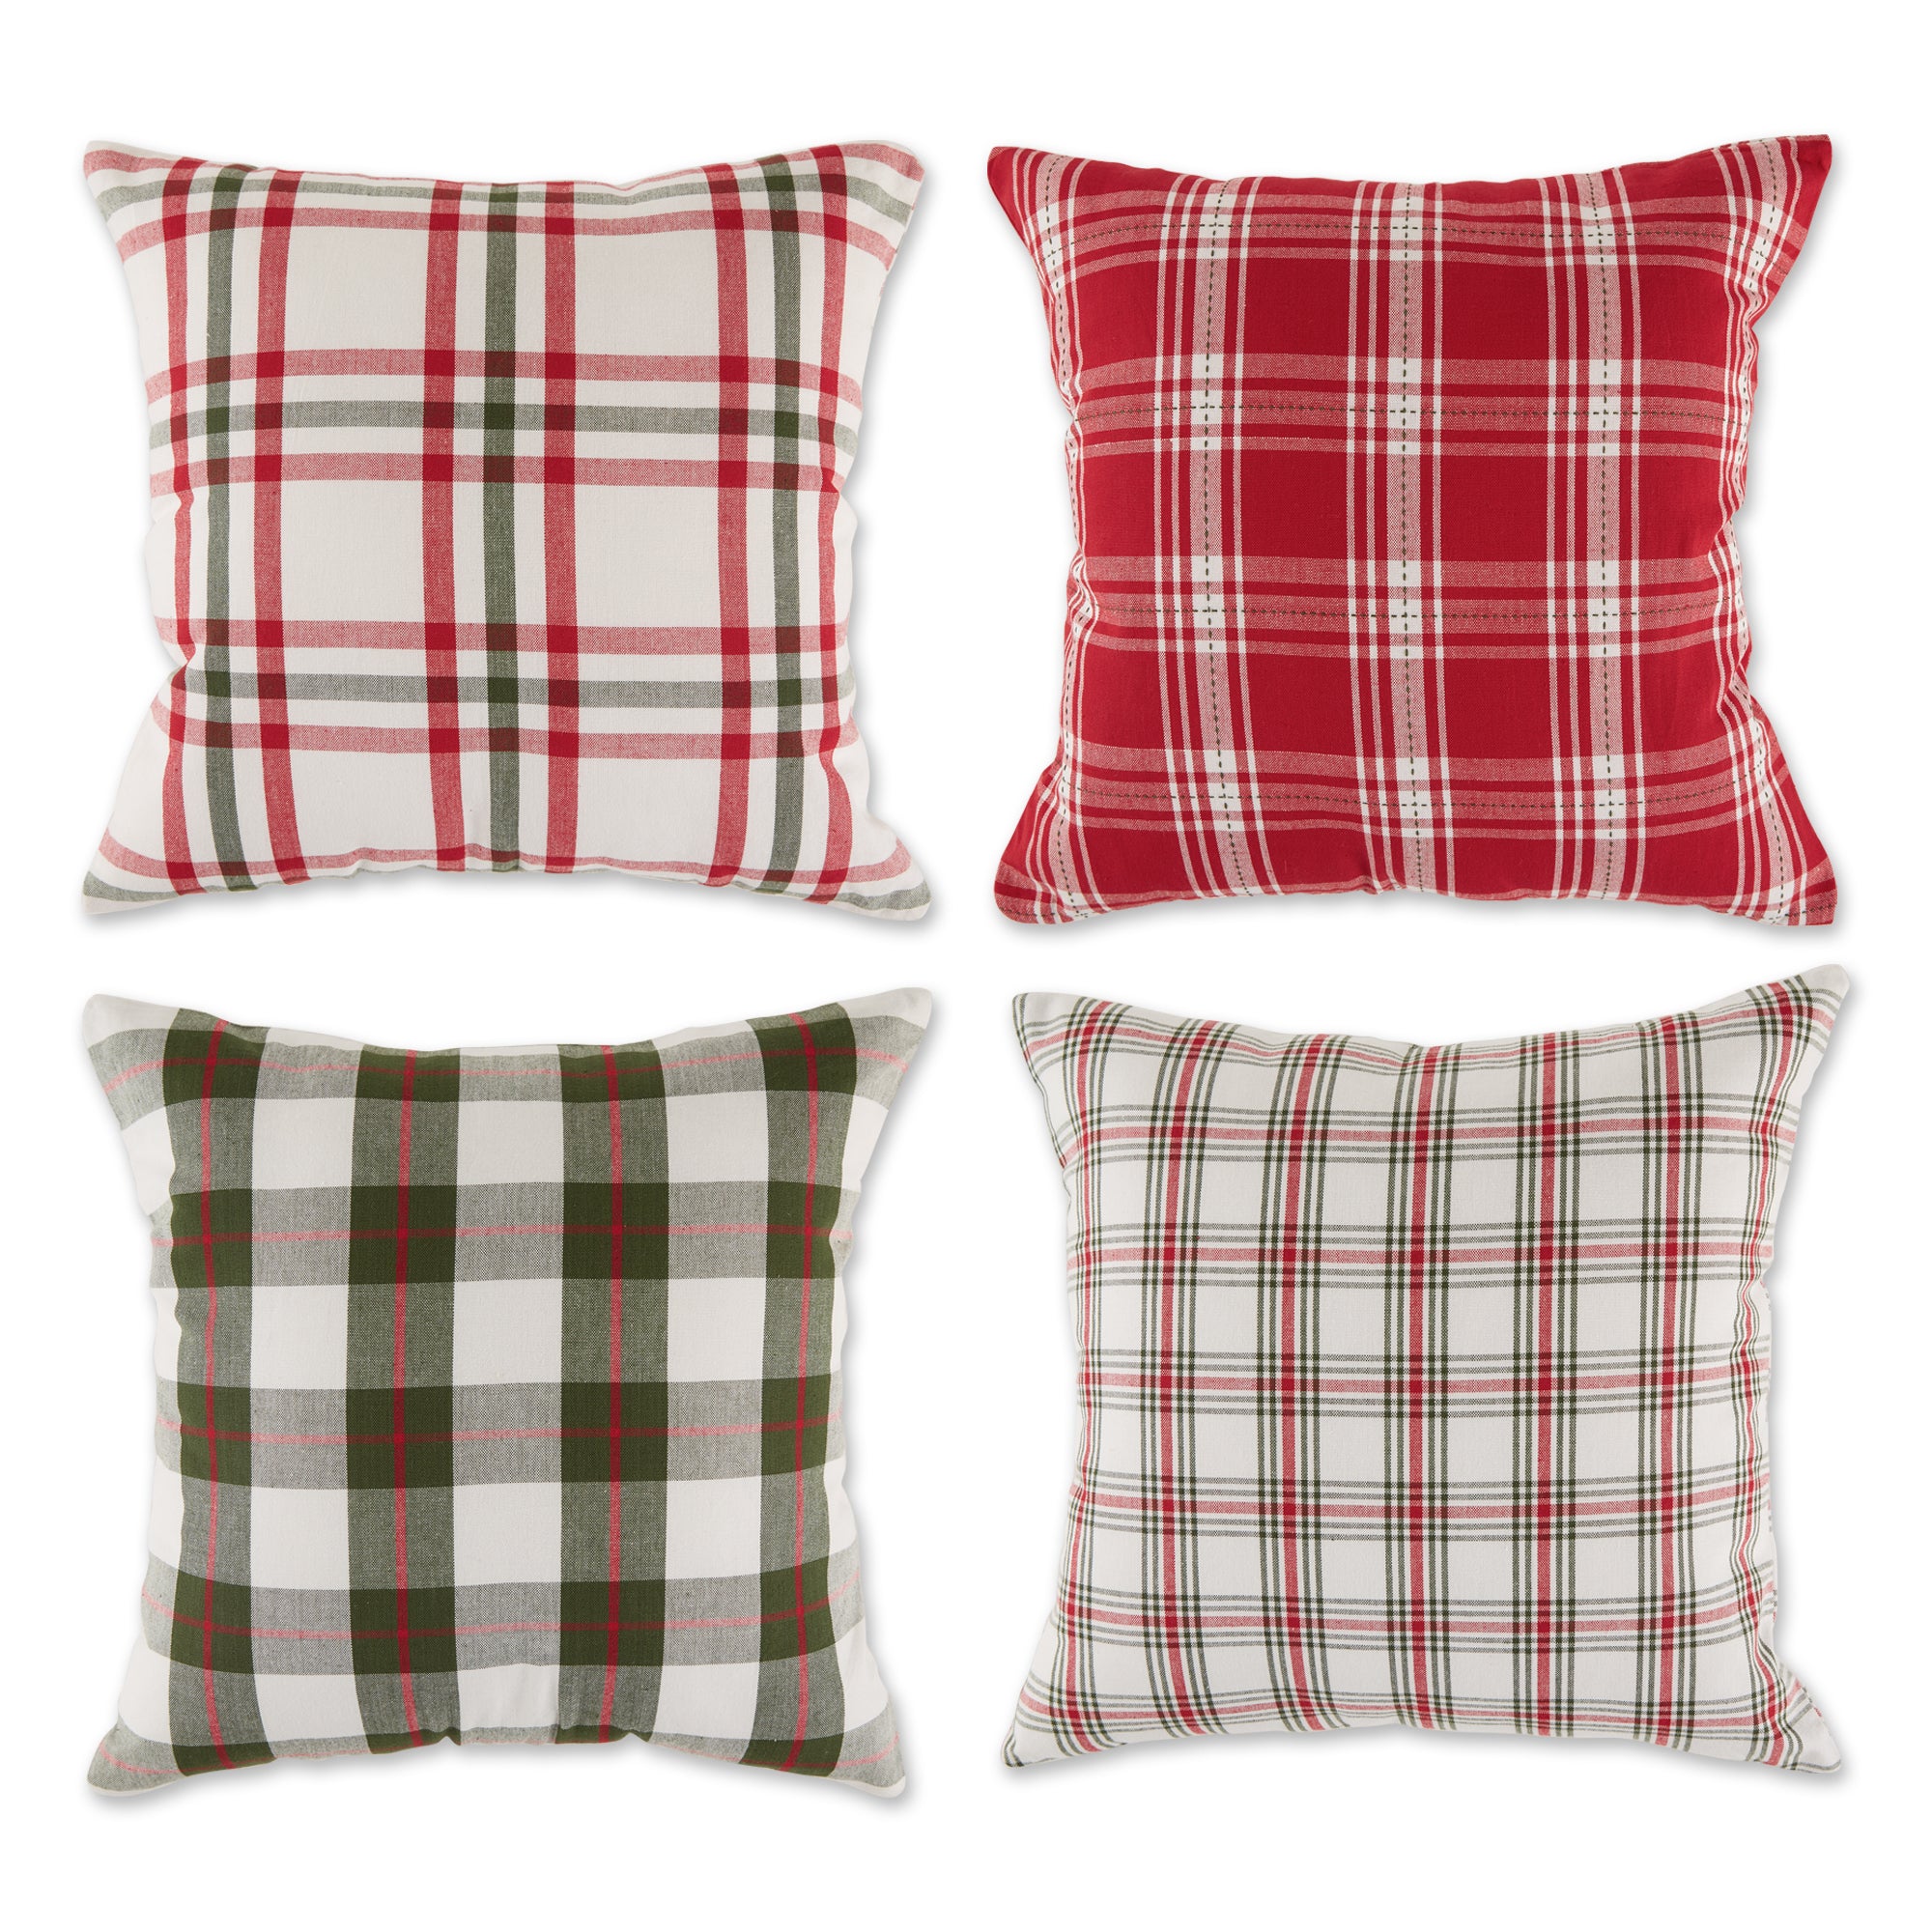 DII Black, Cardinal Red and White Pillow Cover 18x18 inch, 4 Piece